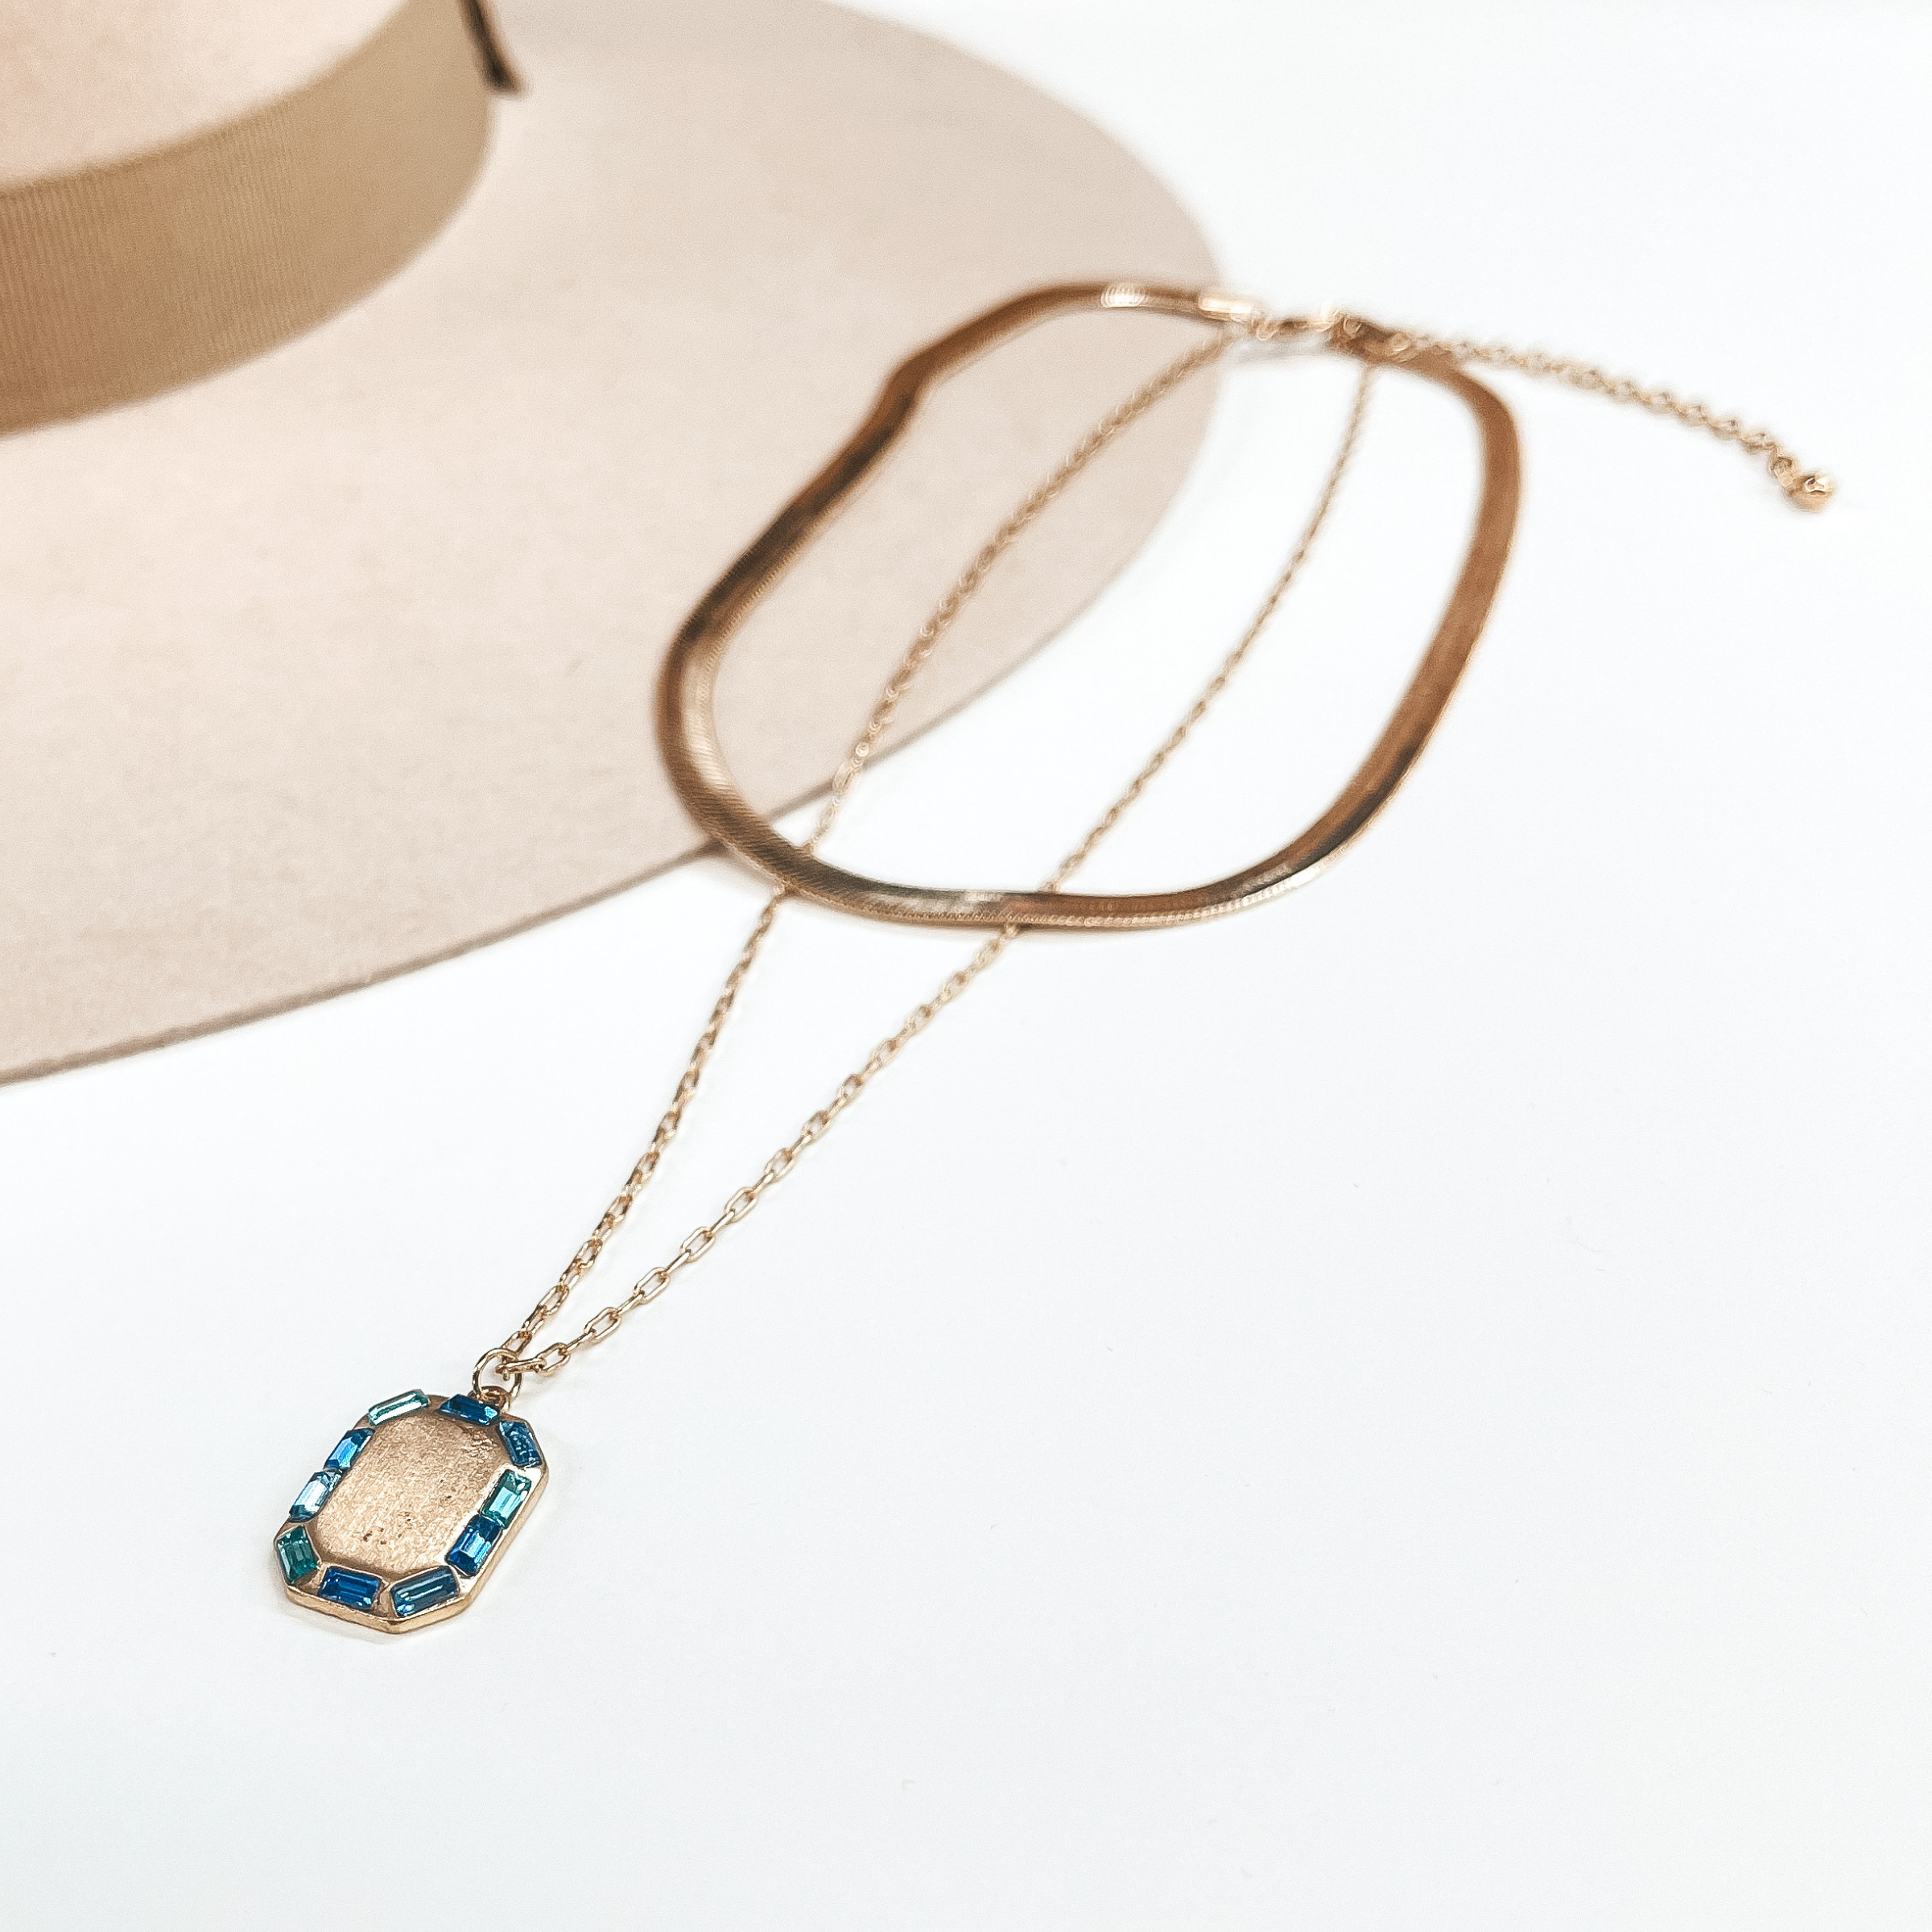 Made For Royalty Herringbone Chain and Gold Tone Necklace with Rectangular Pendant in Blue - Giddy Up Glamour Boutique